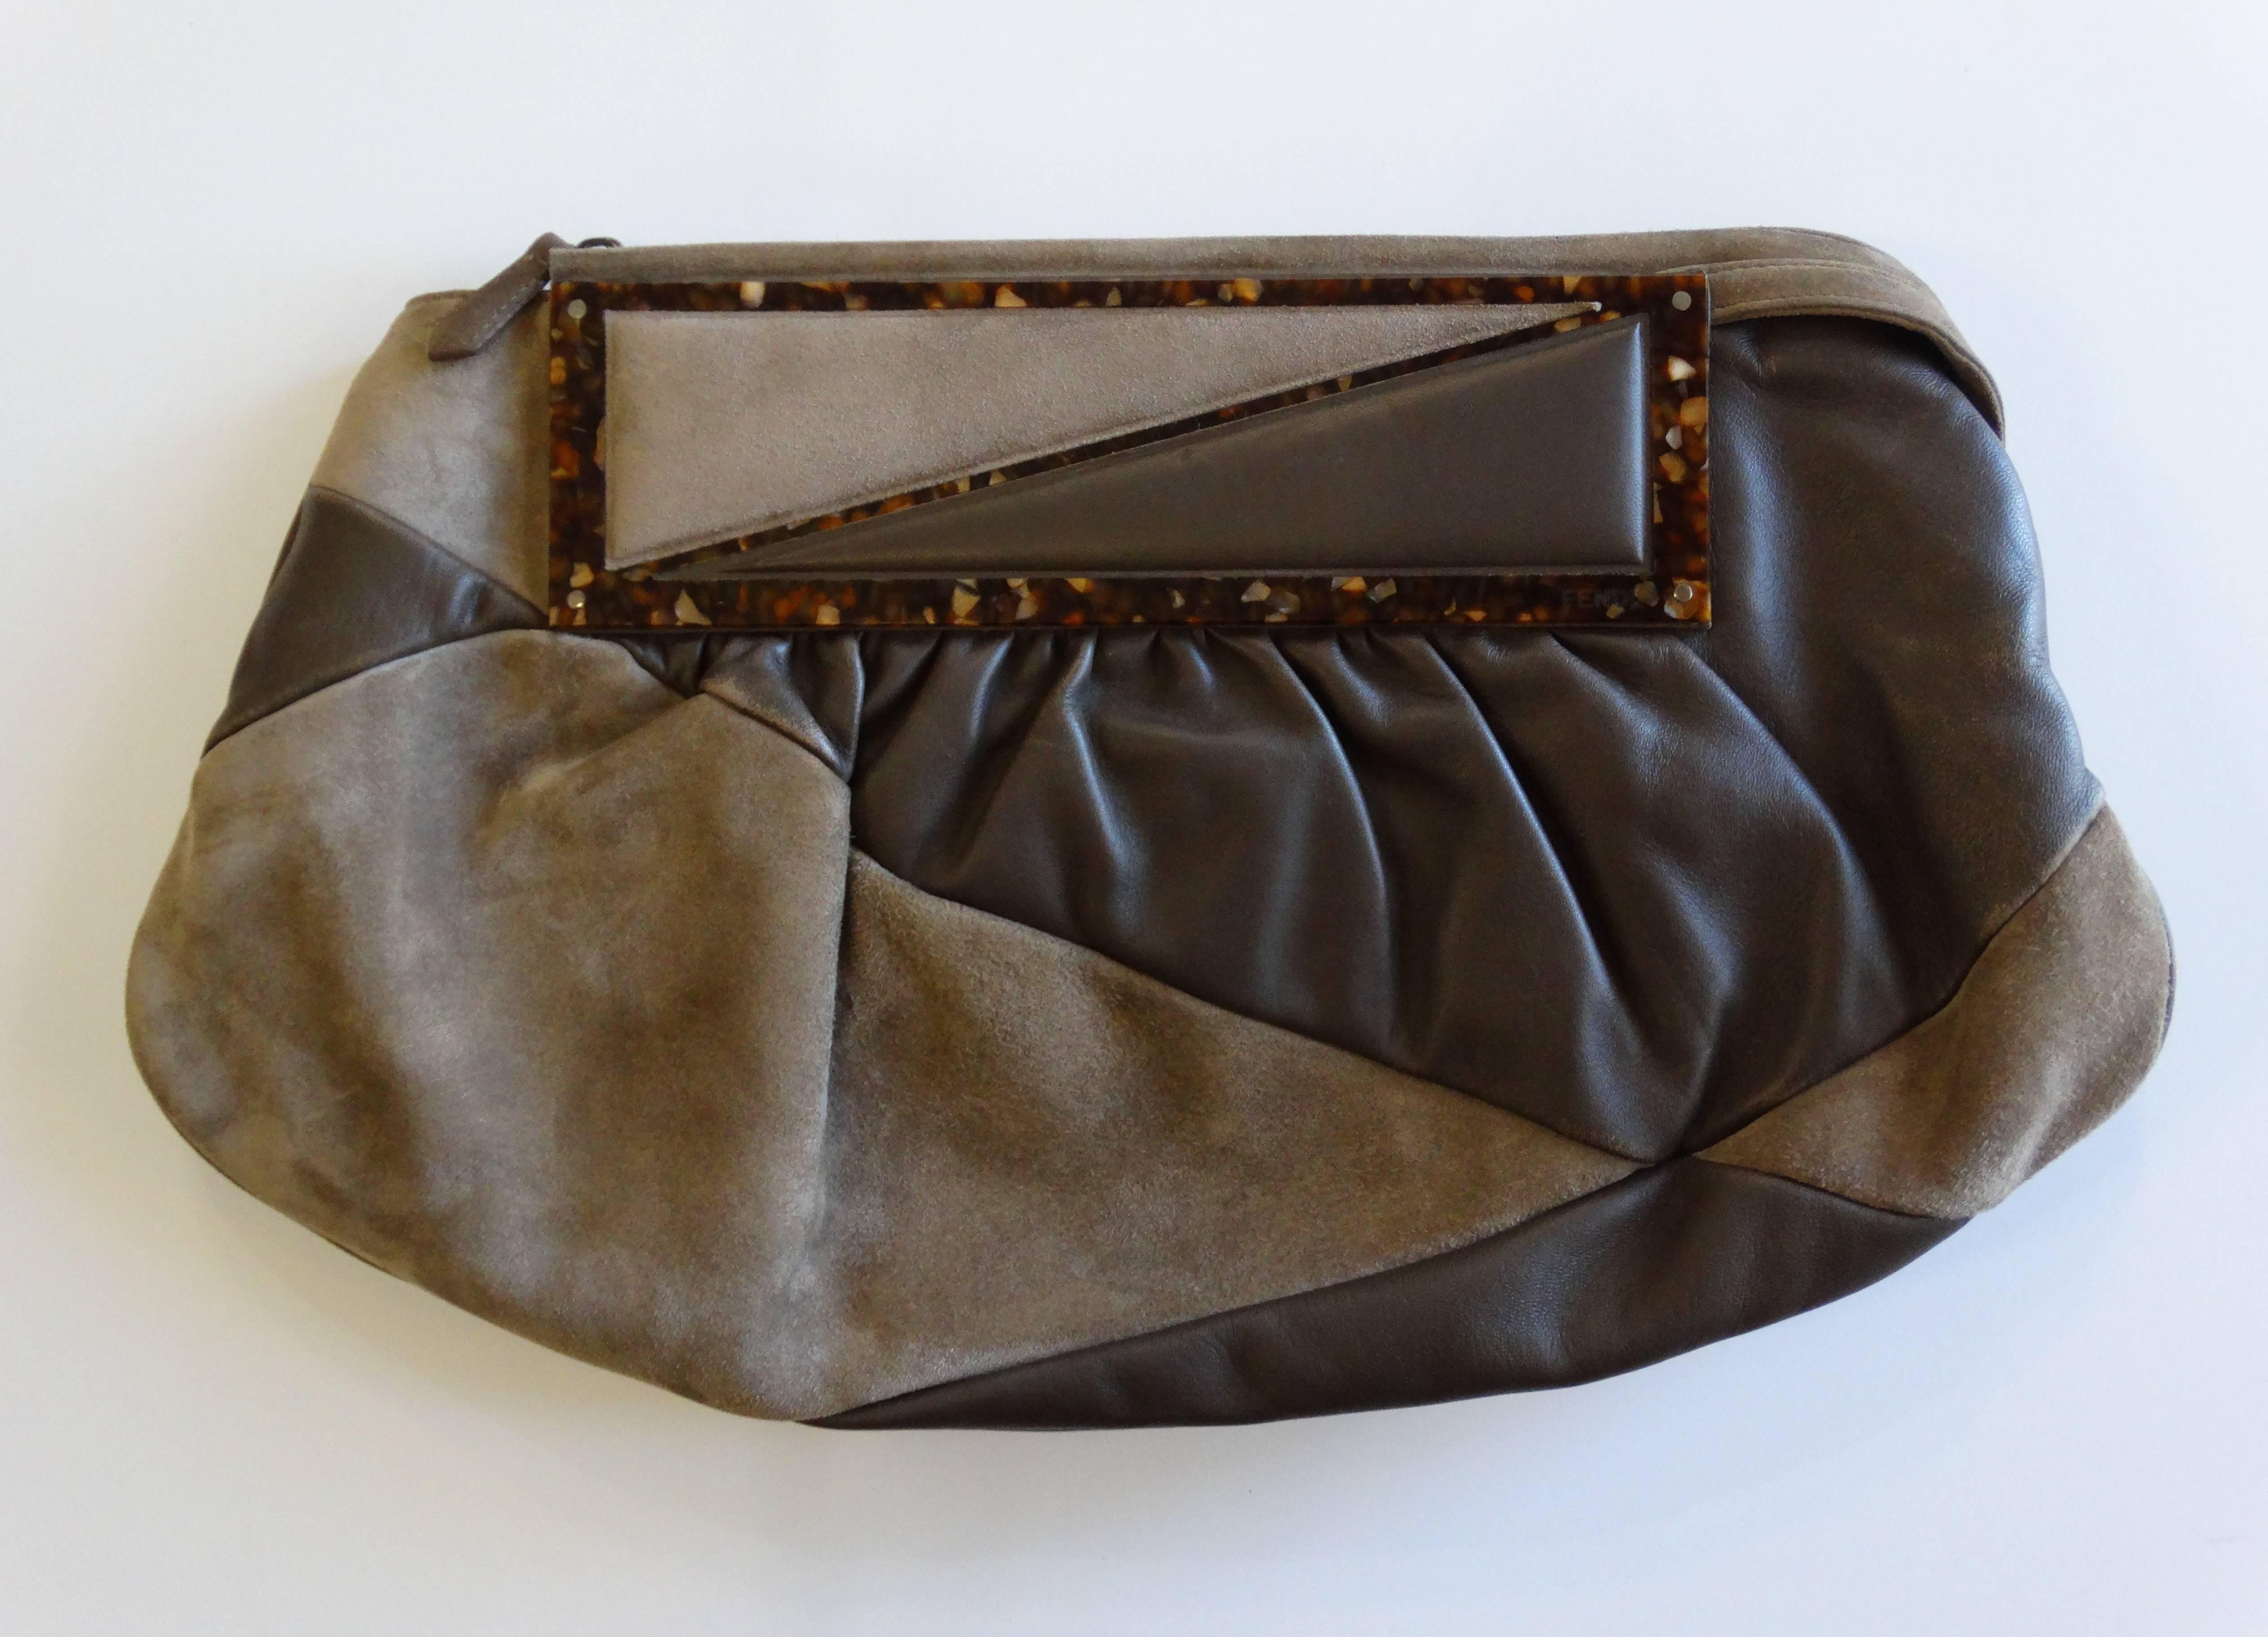 Incredible late 90's Fendi Borsa Pochette to You bag! Hobo style with loose construction and top handle for easy carrying. Zips open at the top to reveal fully lined cloth interior and zipper pocket. Made of a soft buttery tan suede and rich brown